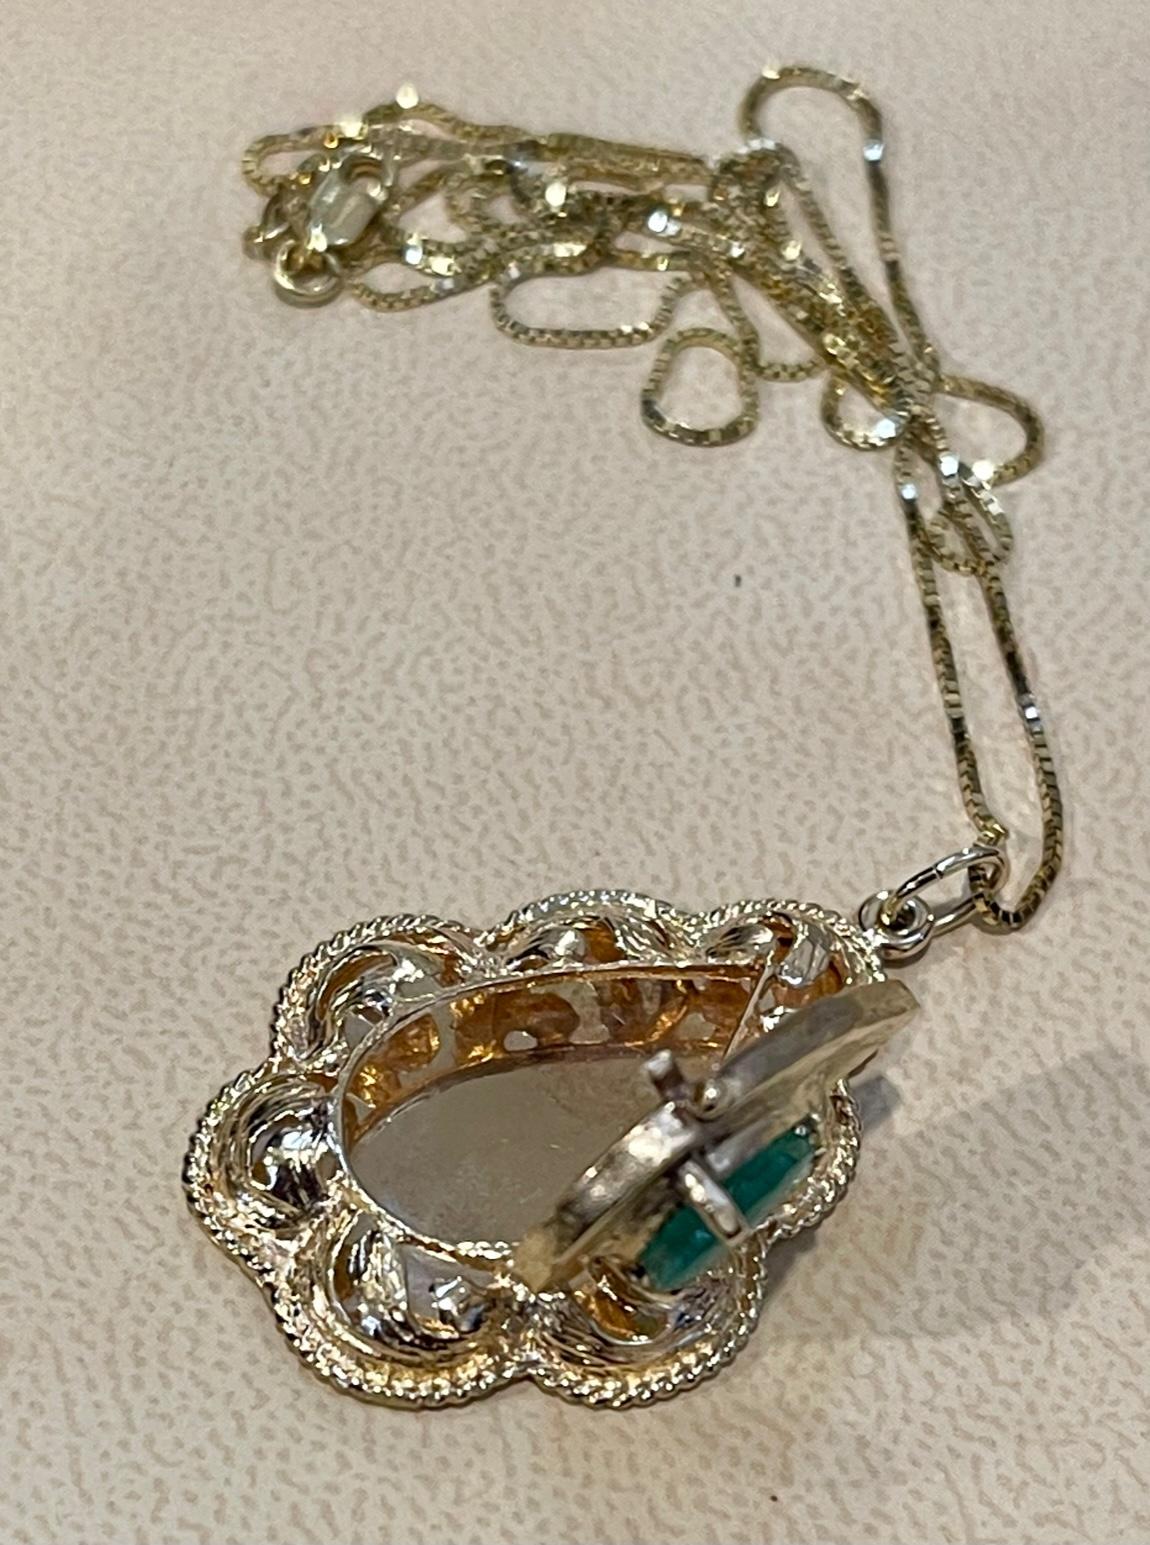 Vintage 14 Karat Yellow Gold 10.5 Gm Chain with Locket and Natural Emerald For Sale 7